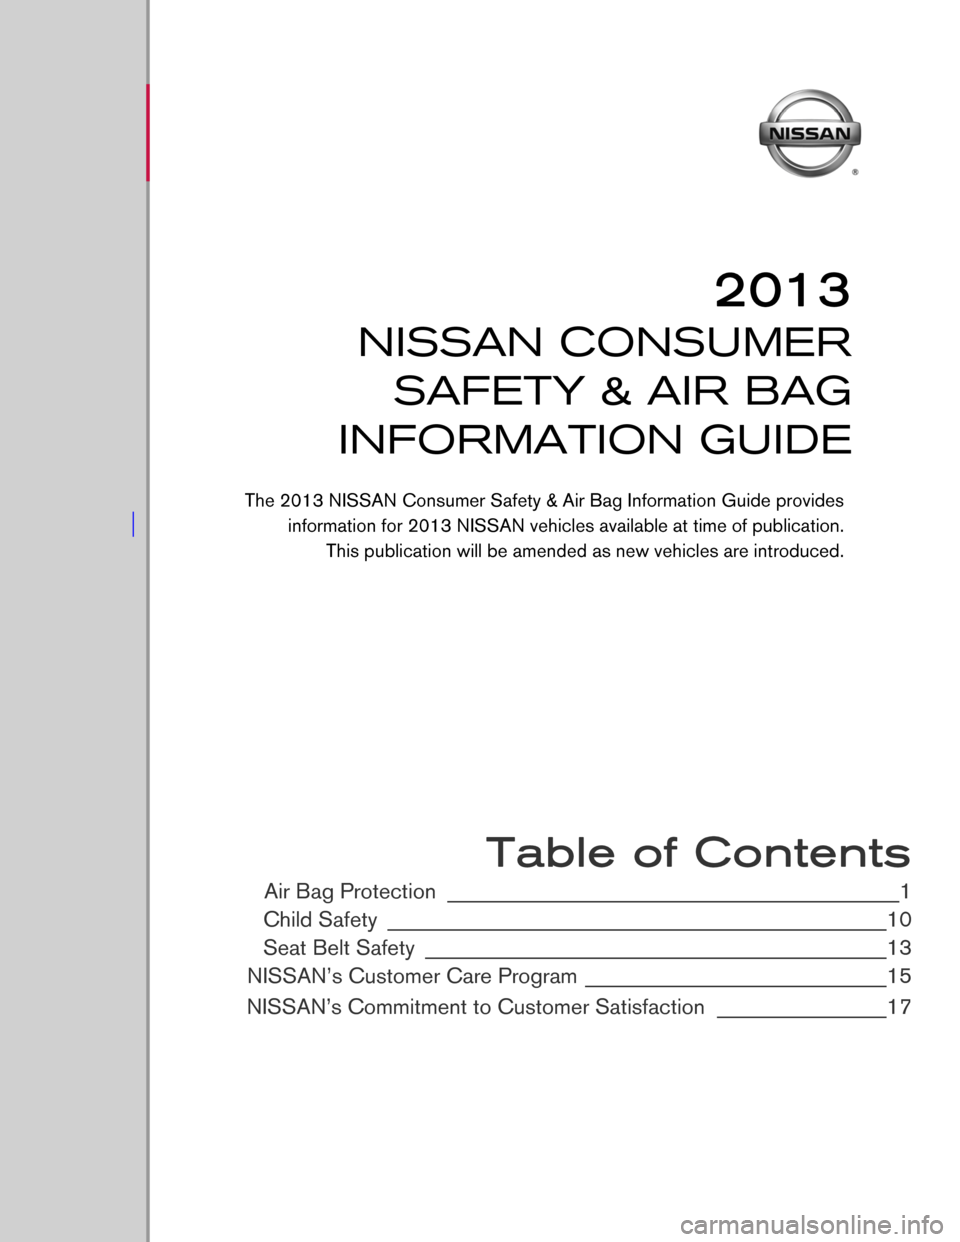 NISSAN QUEST 2013 RE52 / 4.G Consumer Safety Air Bag Information Guide  
 
 
 
 
 
 
 
 
 
 
 
 
 
 
 
 
 
 
 
 
 
 
 Table of Contents
Air Bag Protection ________________________________________________1
Child Safety
 ____________________________________________________